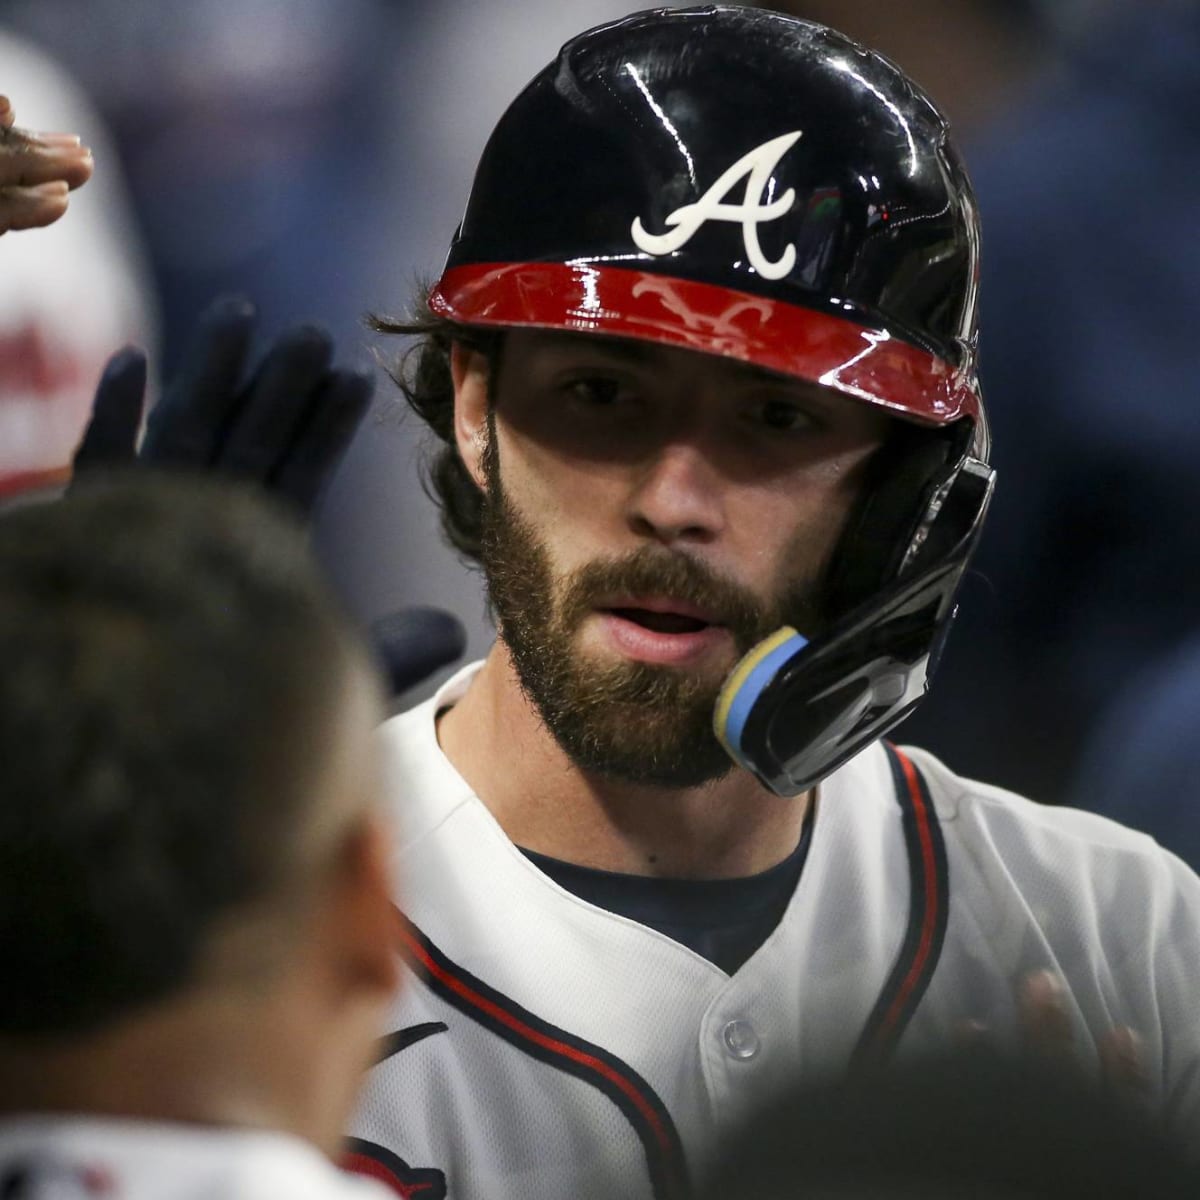 Dansby Swanson agrees to 7-year deal with Cubs